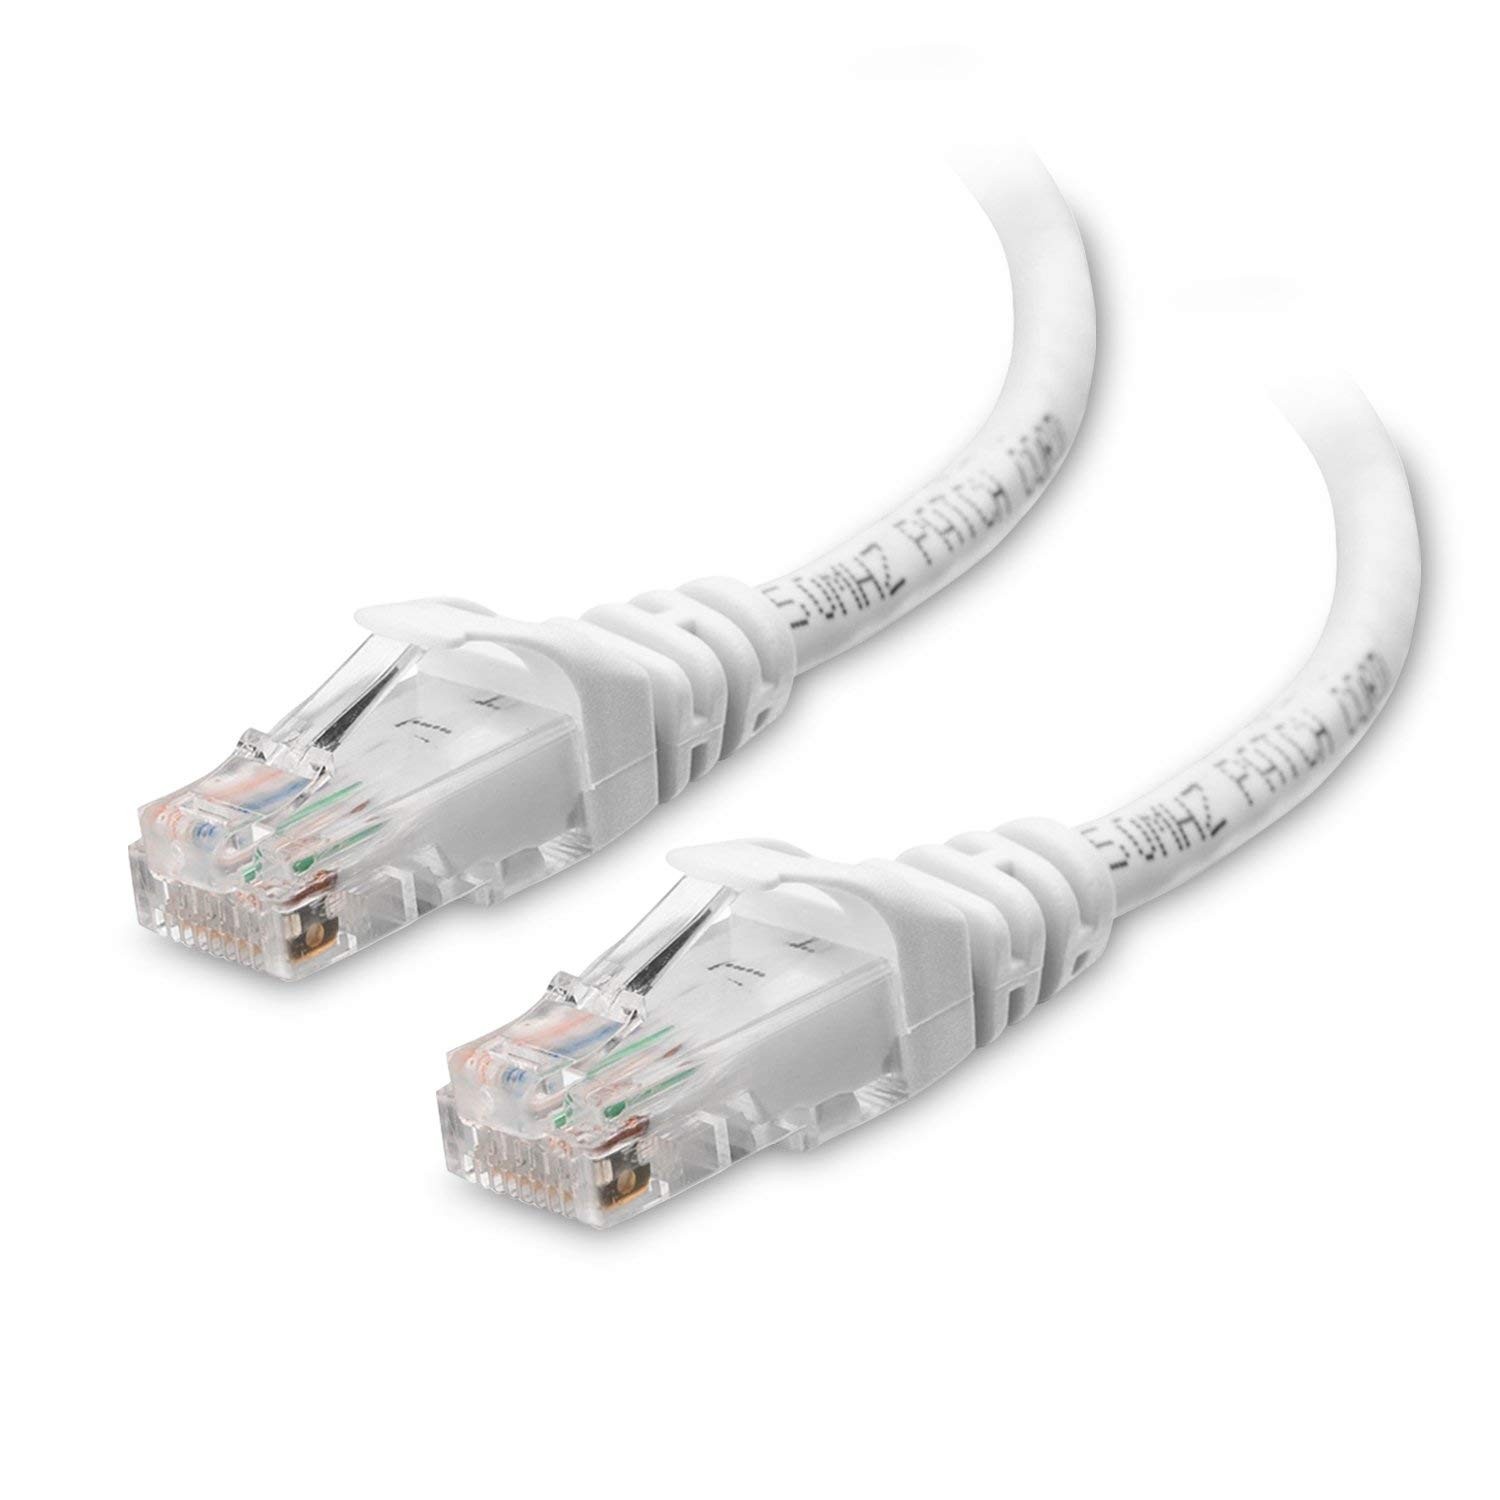 Amazon Cable Matters Snagless Cat6 Ethernet Cable Cat6 Cable Cat 6 Cable in White 150 Feet Available 1FT 150FT in Length puters &